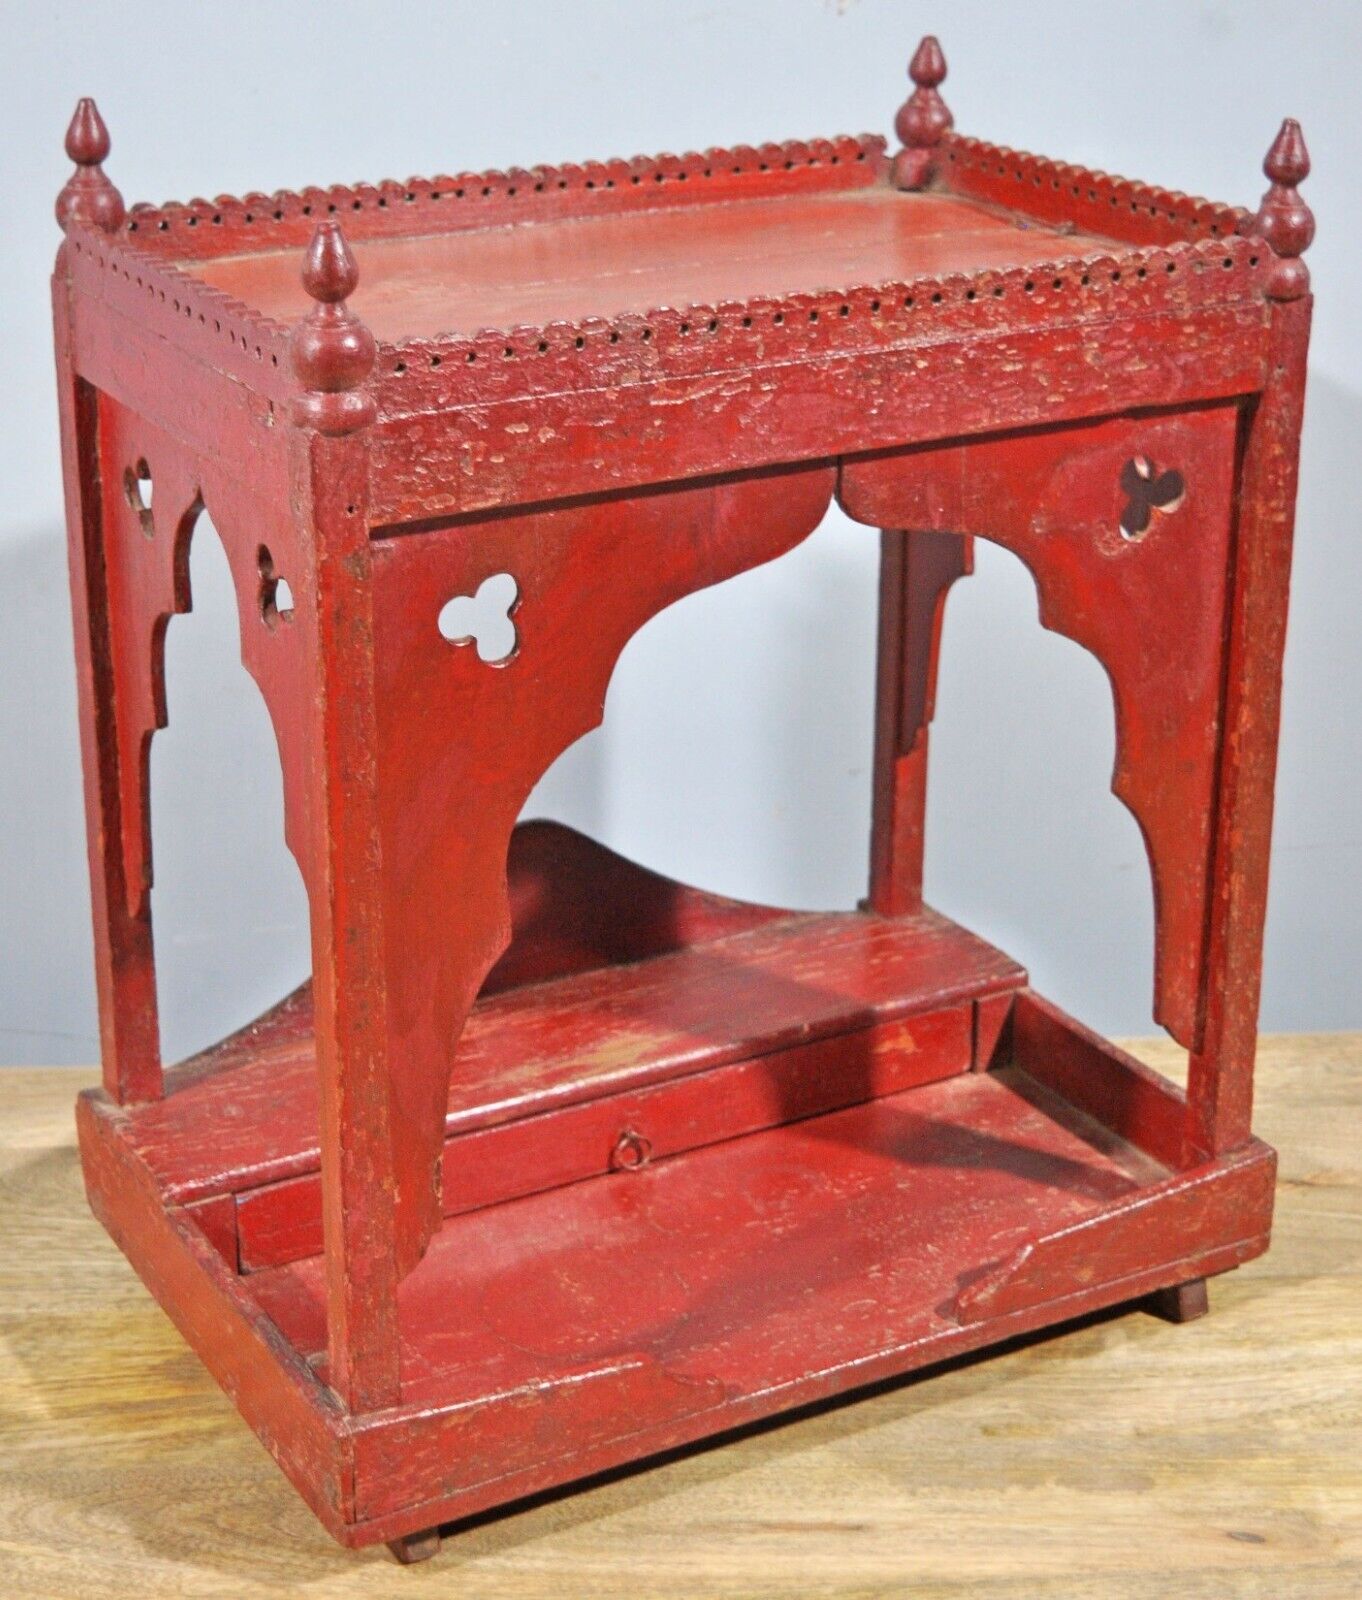 Antique Wooden Large Red Worship Temple Mandir Original Old Fine Hand Crafted